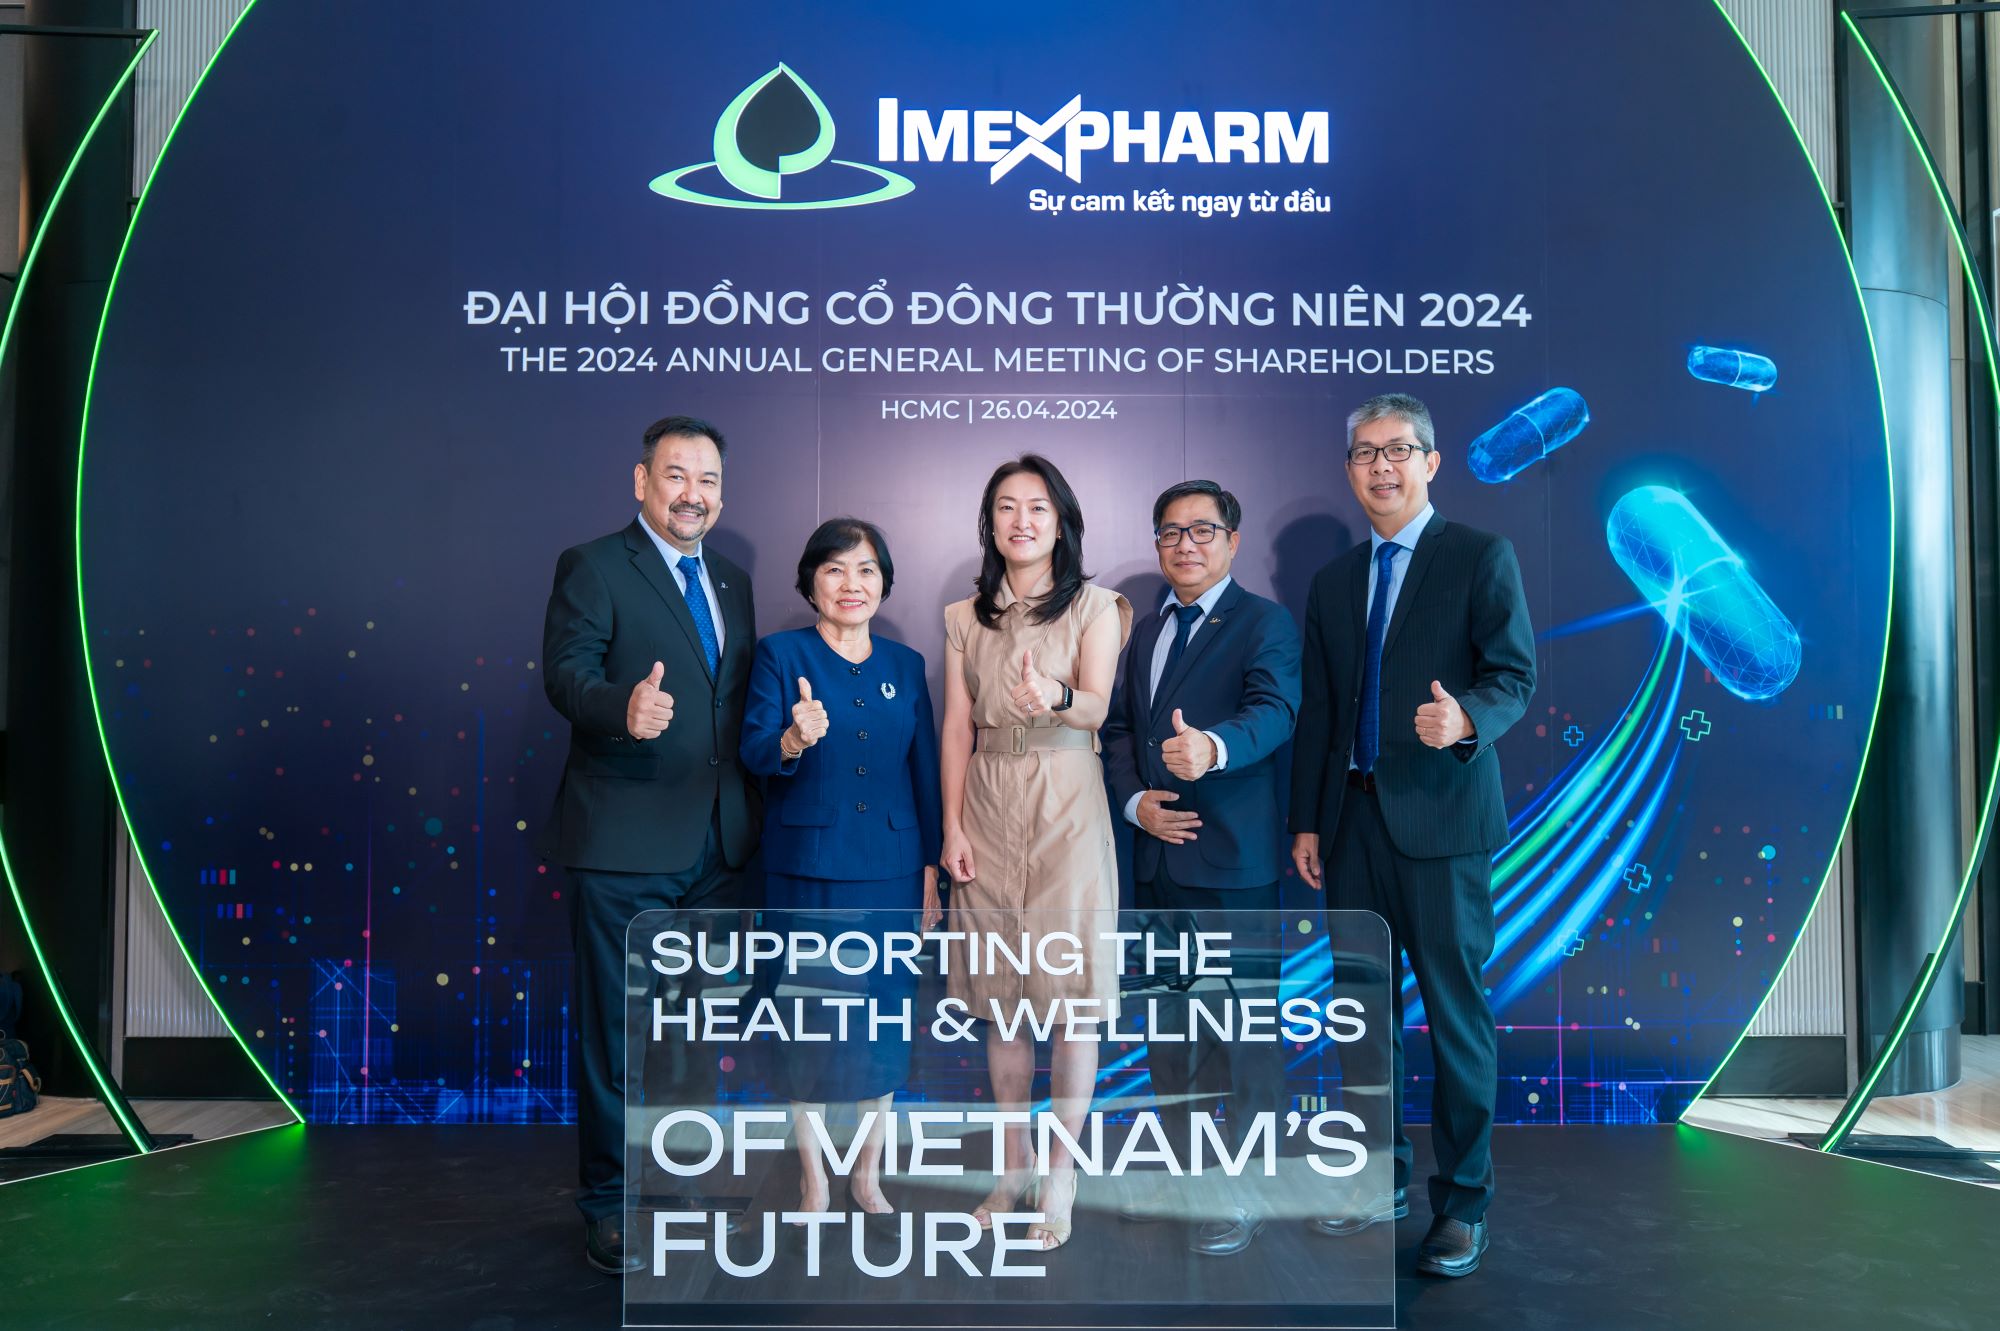 Imexpharm corporation hosts shareholders, analysts and potential investors at its 2024 annual general meeting